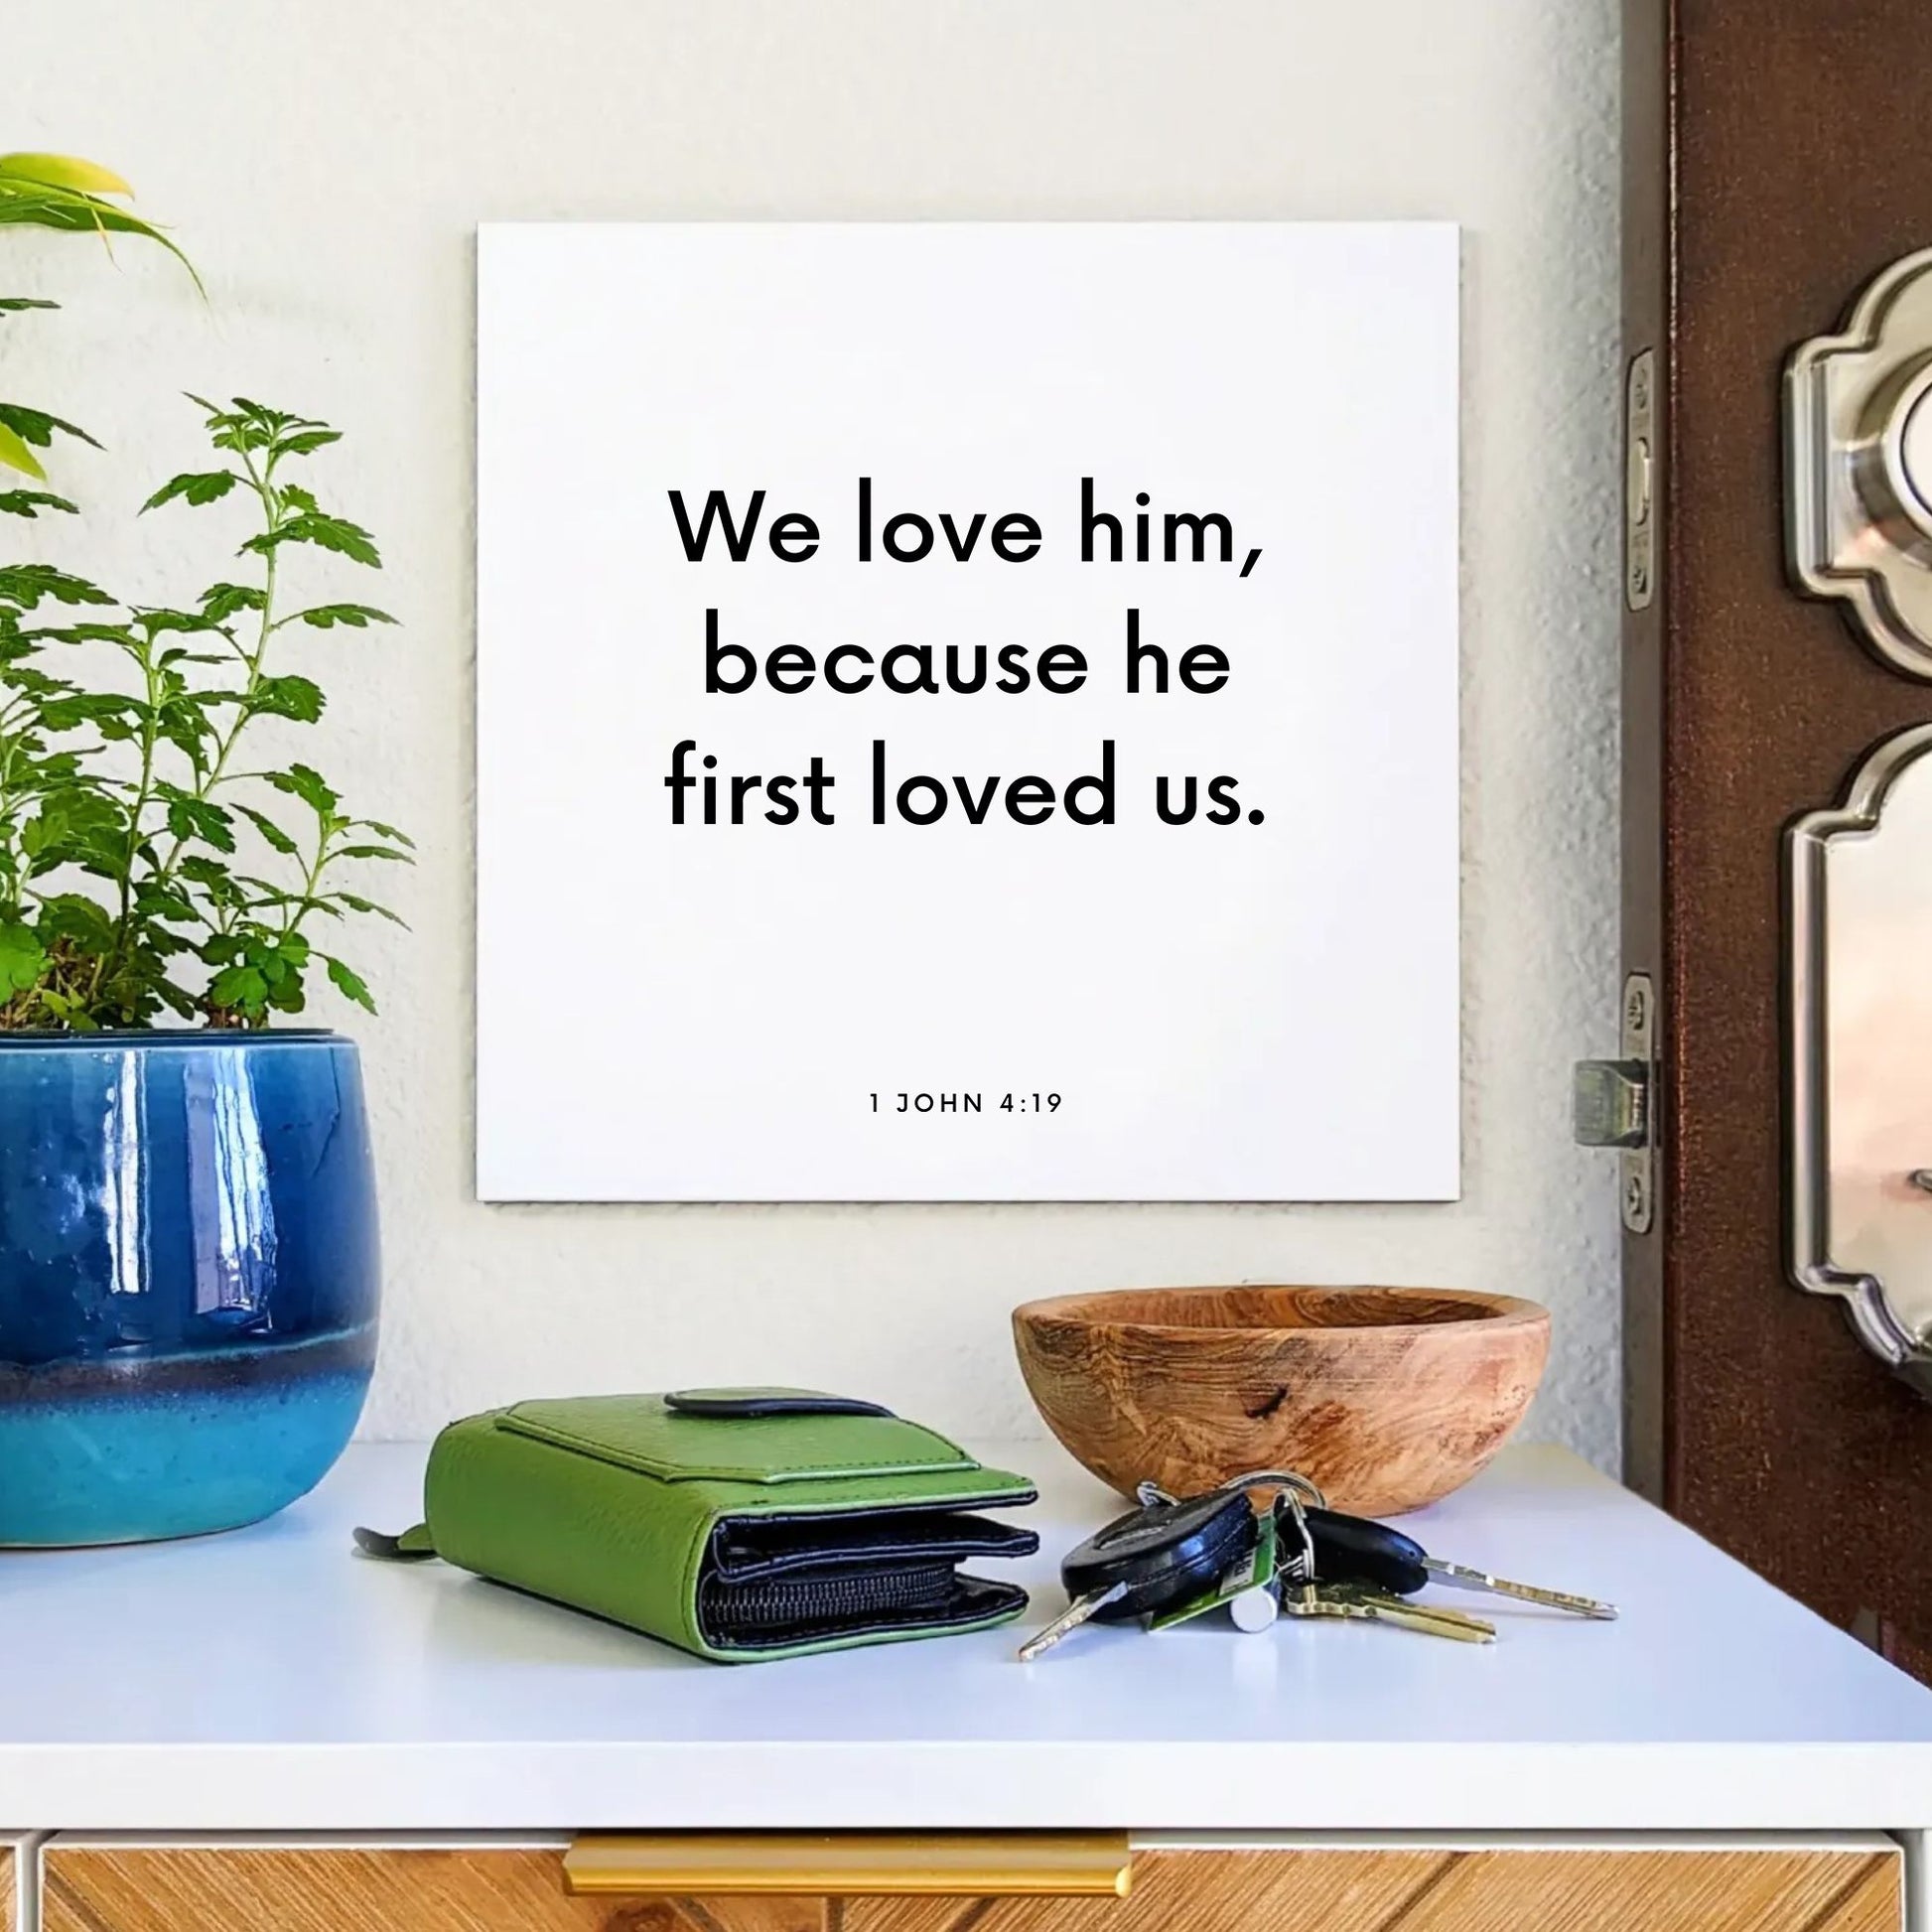 Entryway mouting of the scripture tile for 1 John 4:19 - "We love him, because he first loved us"